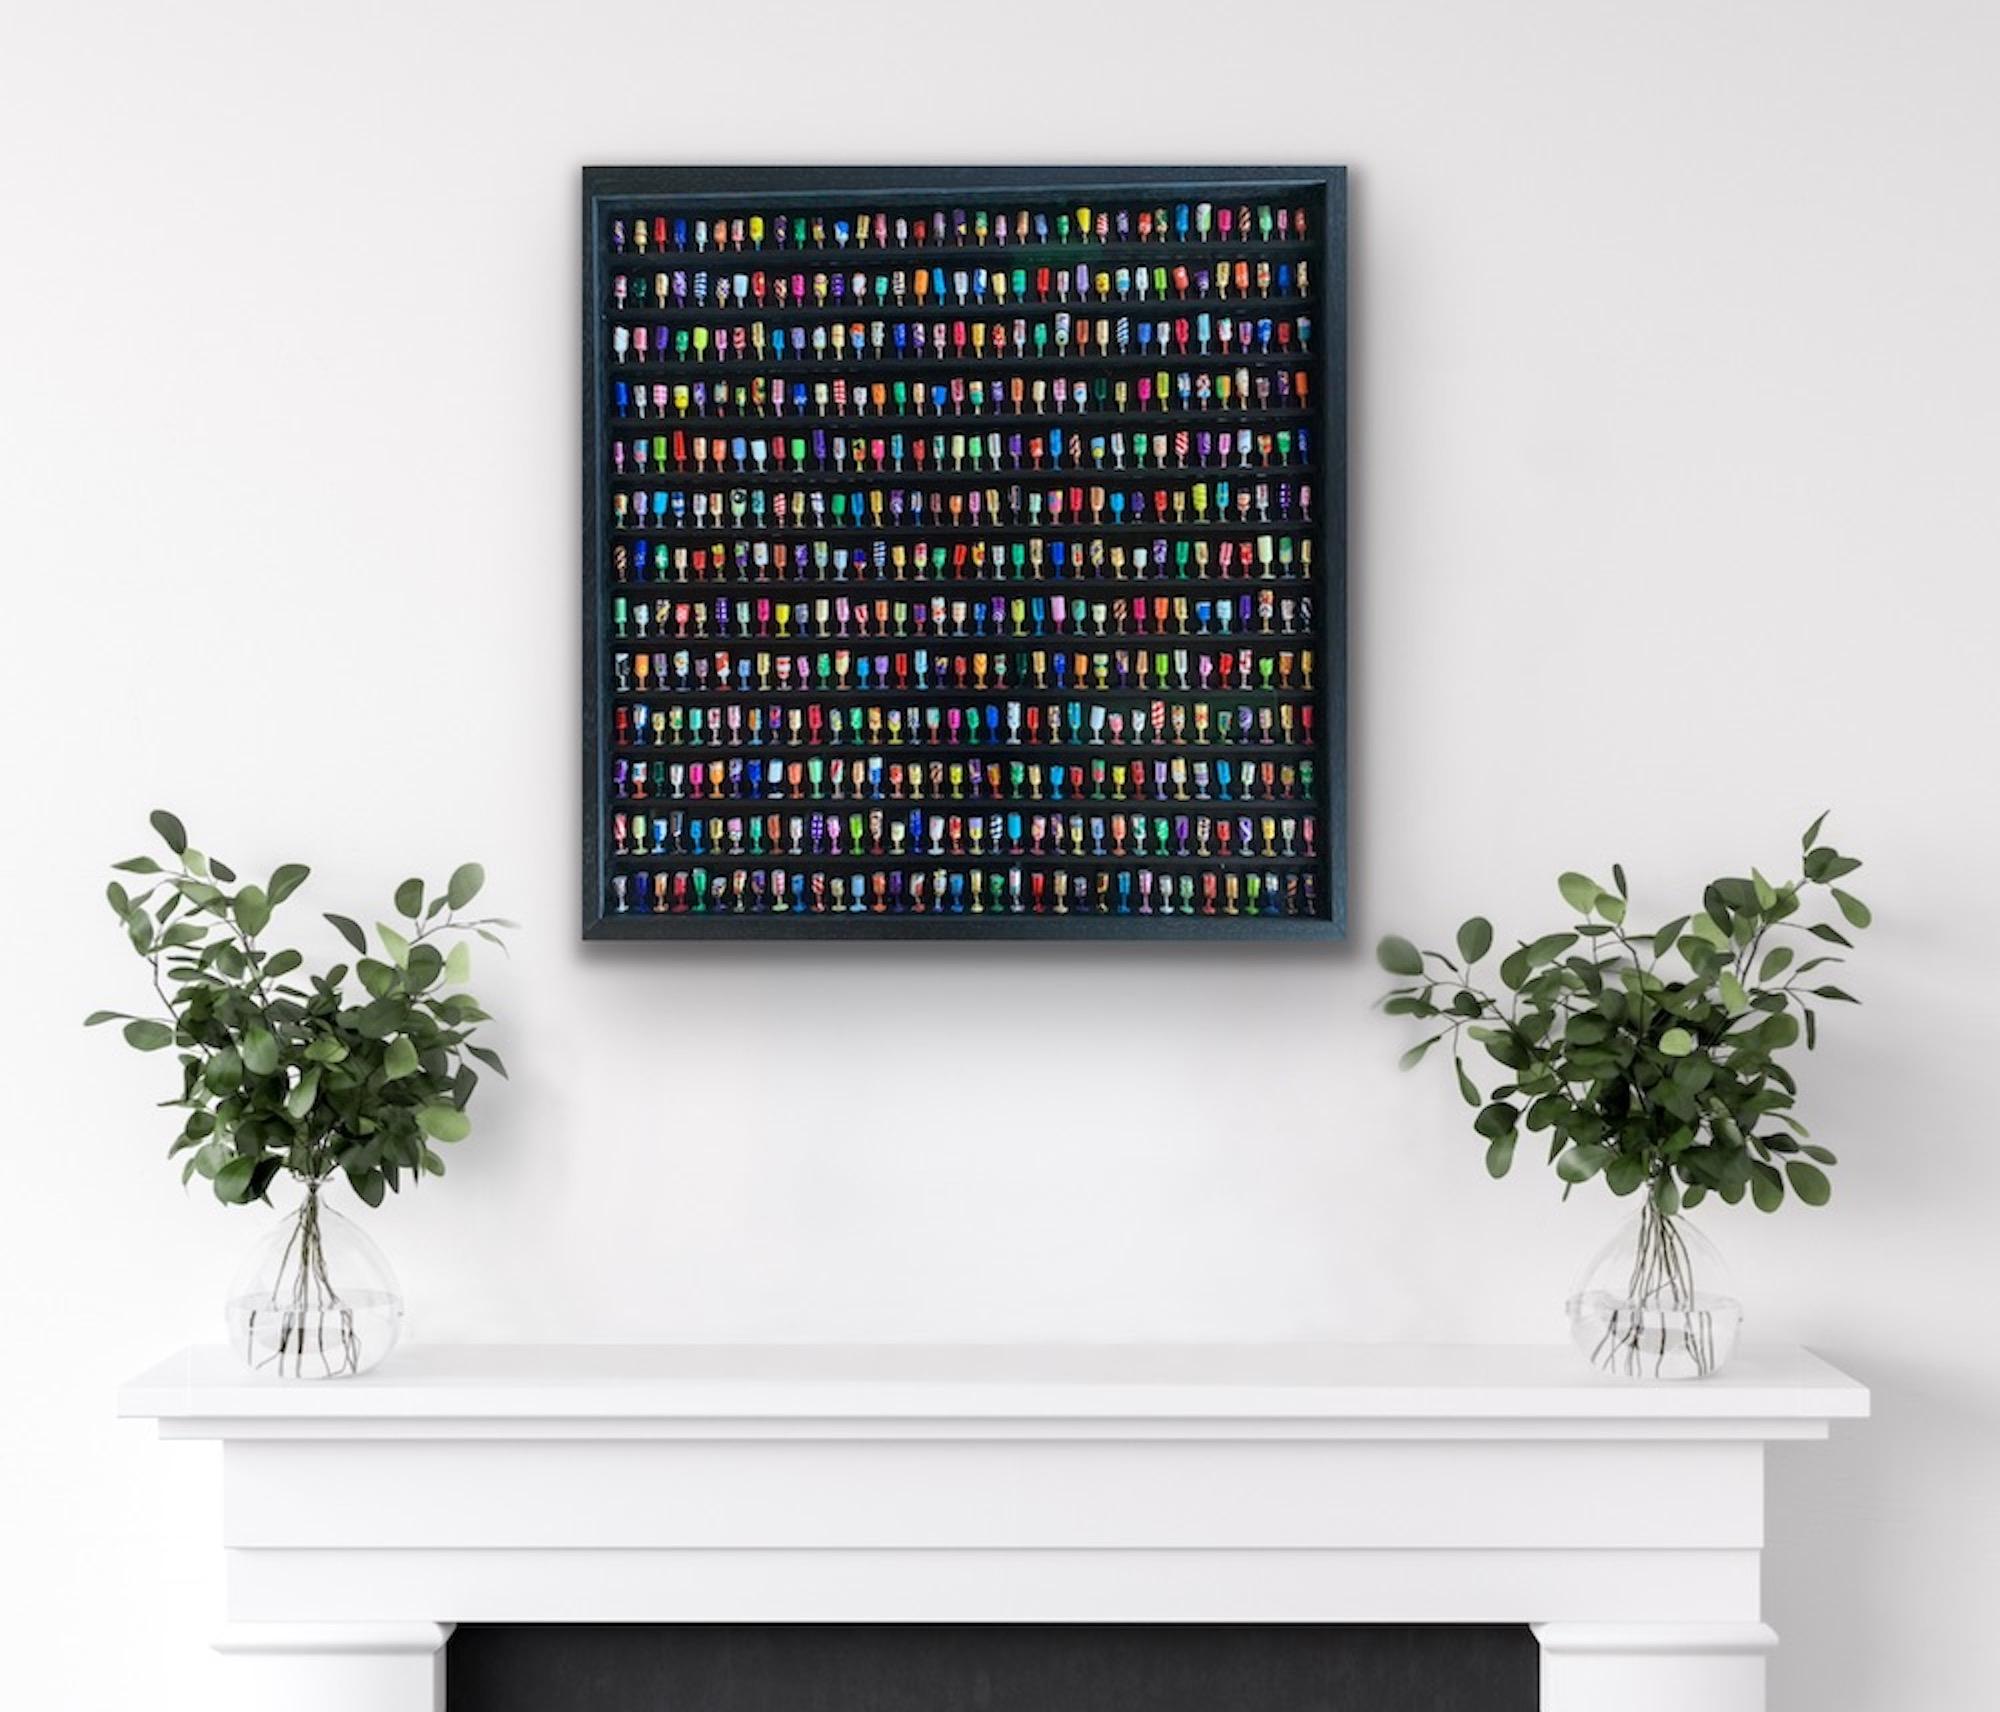 Goblets IX is a signed original wall sculpture made from sweet wrappers by Joanne Tinker of a selection of colourful wine goblets on a black shelved frame.

Additional information:
Goblets XXIV by Joanne Tinker [2022]
Sweet Wrappers
Image size: H:64